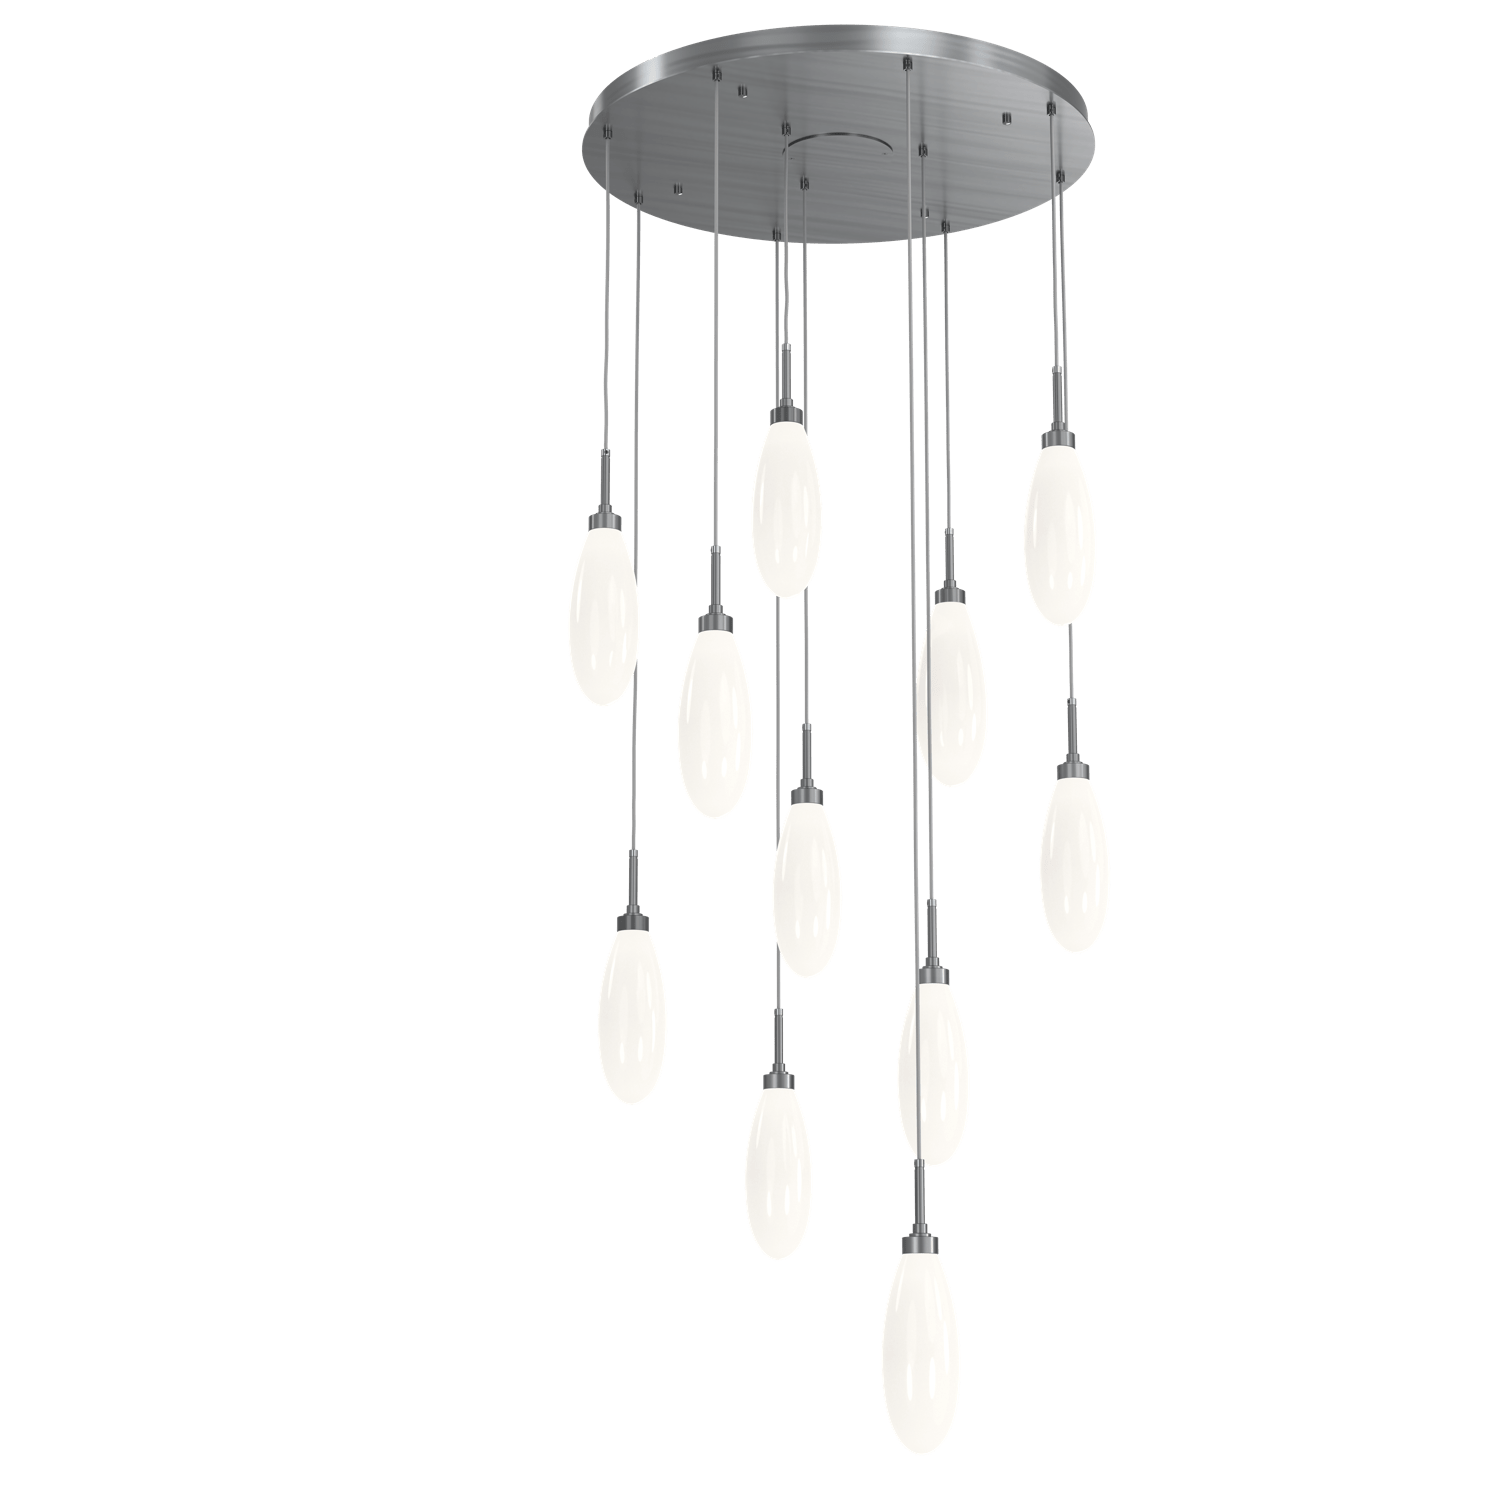 CHB0071-11-GM-WL-LL-Hammerton-Studio-Fiori-11-light-round-pendant-chandelier-with-gunmetal-finish-and-opal-white-glass-shades-and-LED-lamping